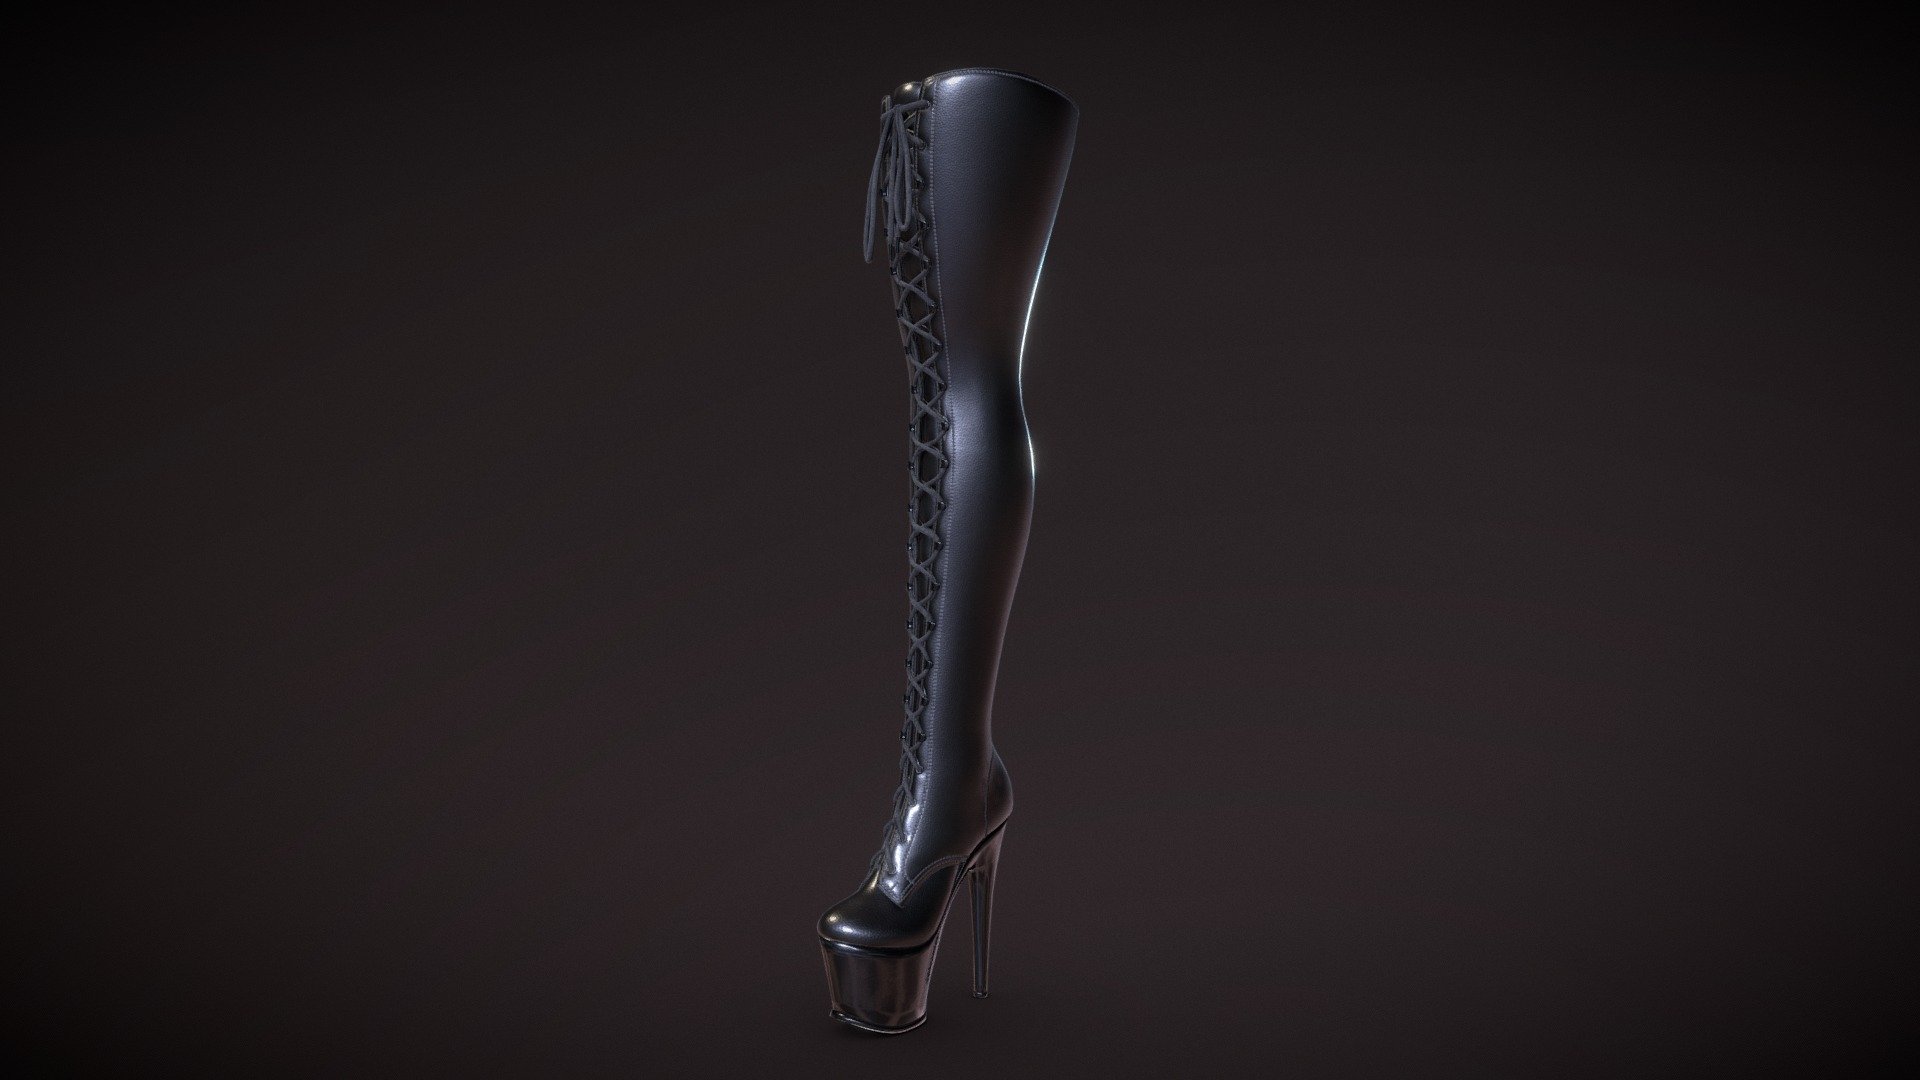 Crotch High Stiletto Heels Boots

Game and production ready, polycount optimized for quality, ideal for high quality Characters and Close-Ups
Internal parts modeled and textured, ideal for customization or animation
Laces are continuous, no cuts behind the eyelets

Single UV space
PBR and UE4 4k Textures
Low Poly has 15k quads
FBX, OBJ, ZTL

Textures updated to 24-Aug-23 Reworked leather Added White leather color variant - Crotch High Stiletto Heels Boots - Buy Royalty Free 3D model by Feds452 3d model